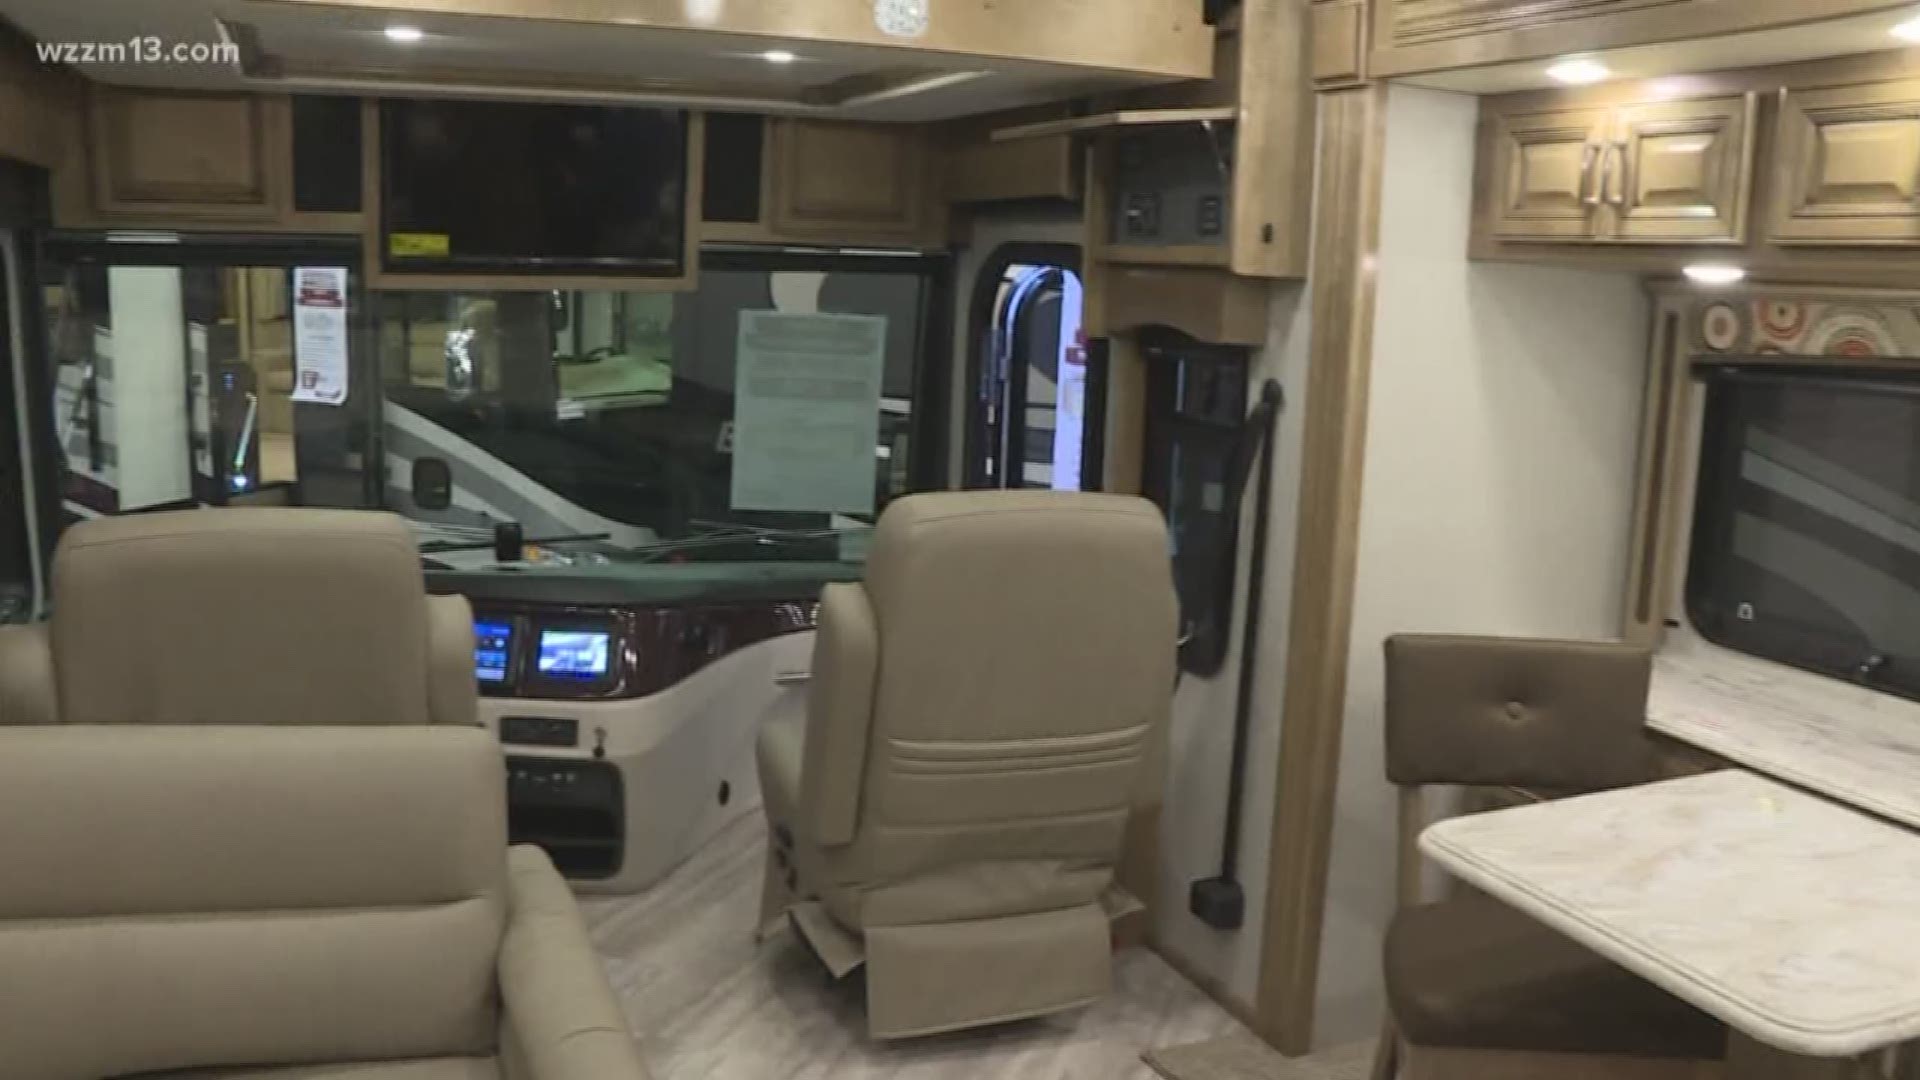 The RV lifestyle is on display at DeVos Place